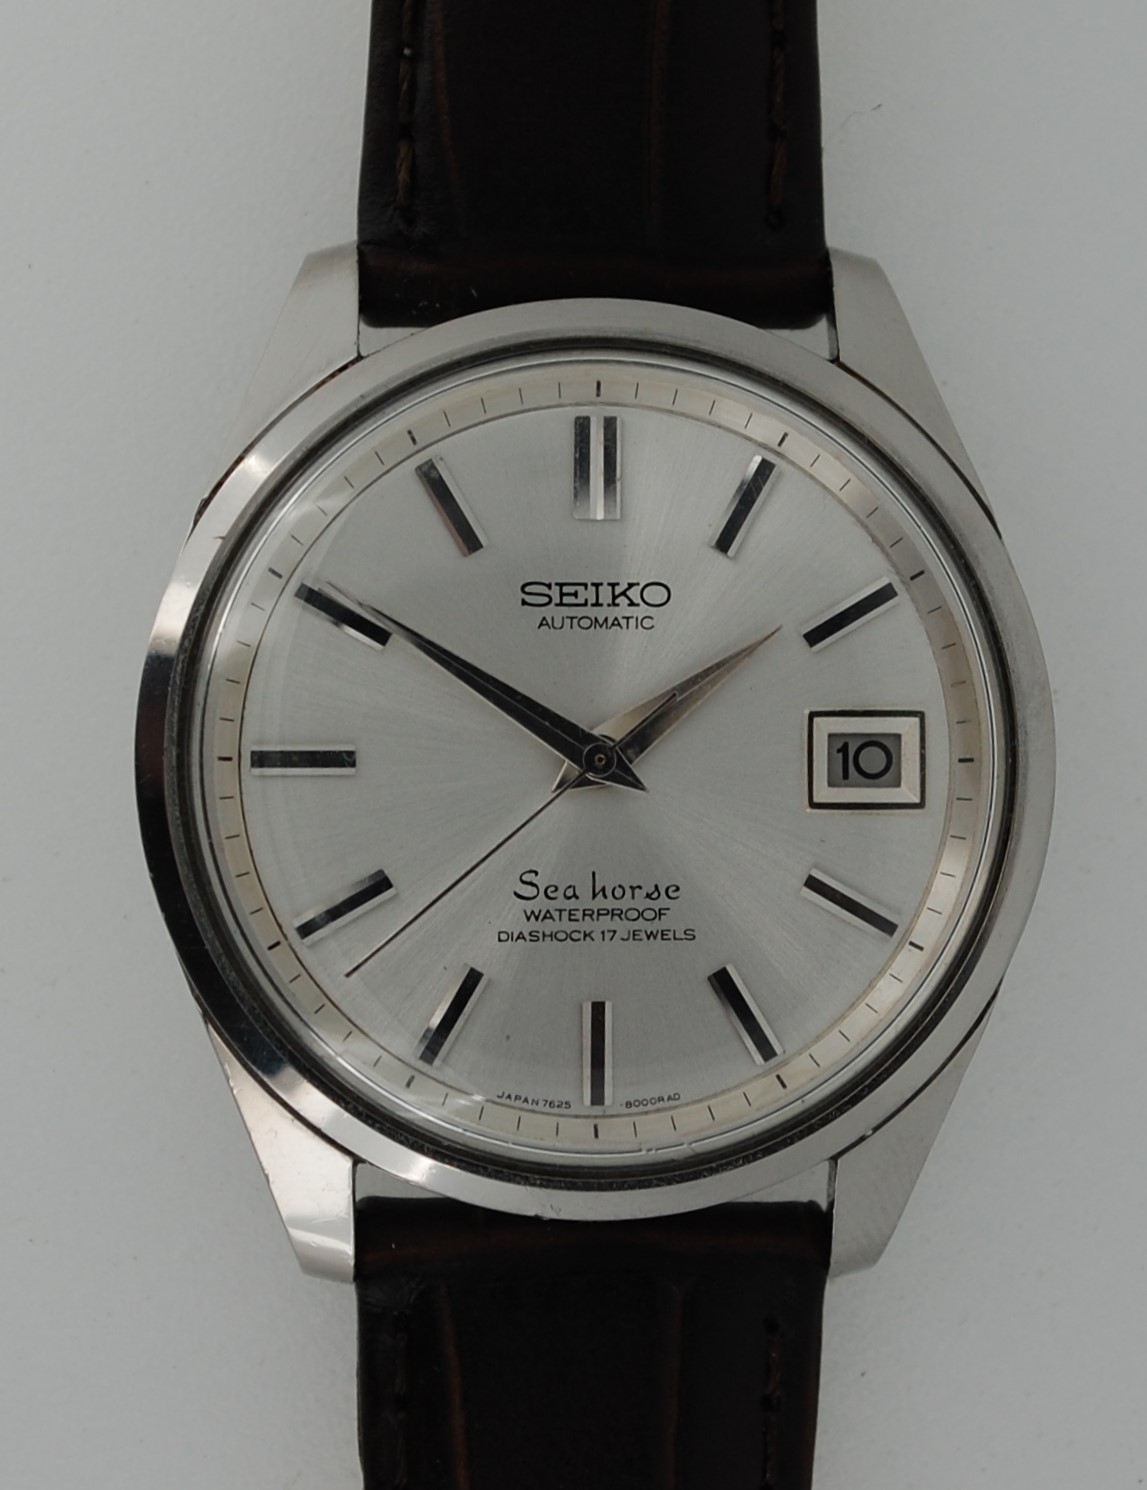 SOLD 1965 Seiko Sea Horse Automatic - Birth Year Watches